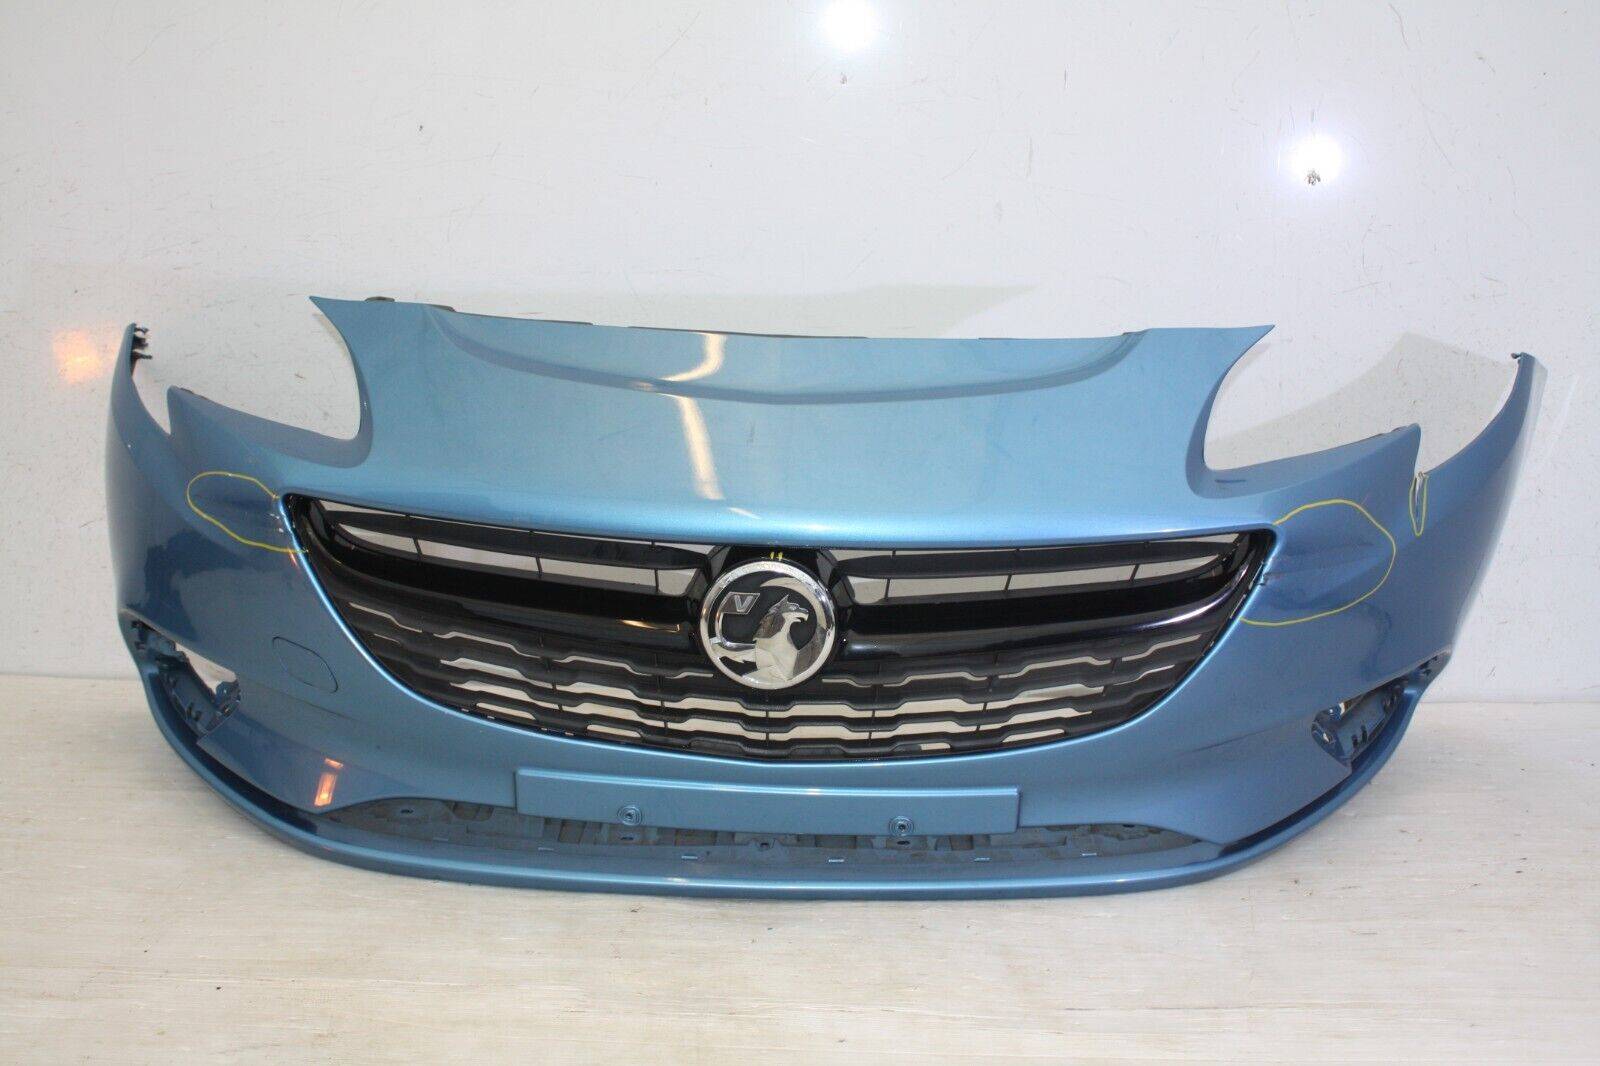 Vauxhall-Corsa-F-Front-Bumper-2015-To-2020-39003567-Genuine-SEE-PICS-176088685366